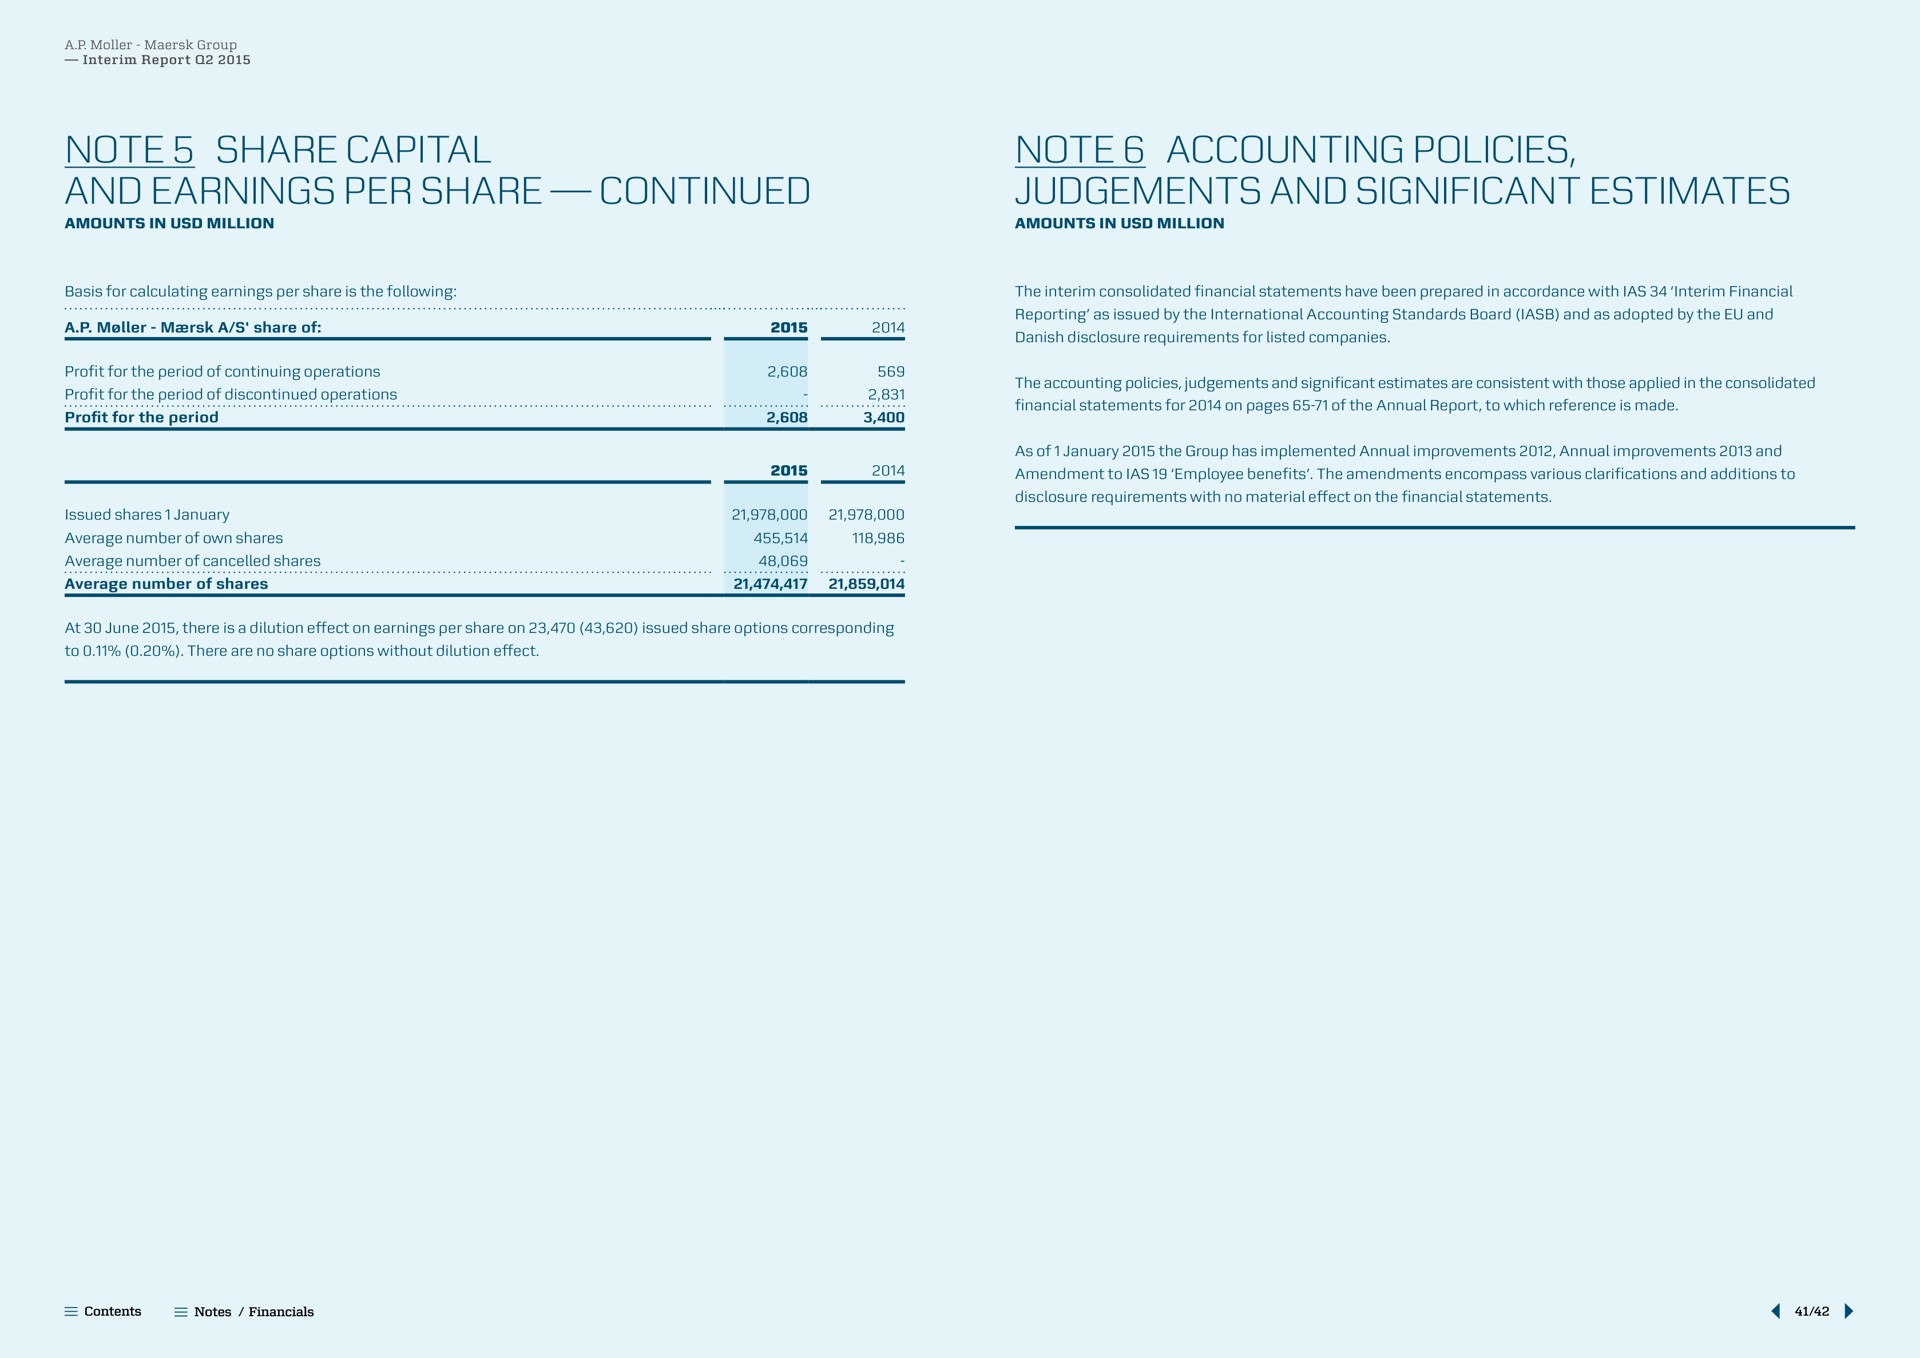 note share capital and earnings per share continued note accounting policies and significant estimates notes average number of cancelled shares | Maersk